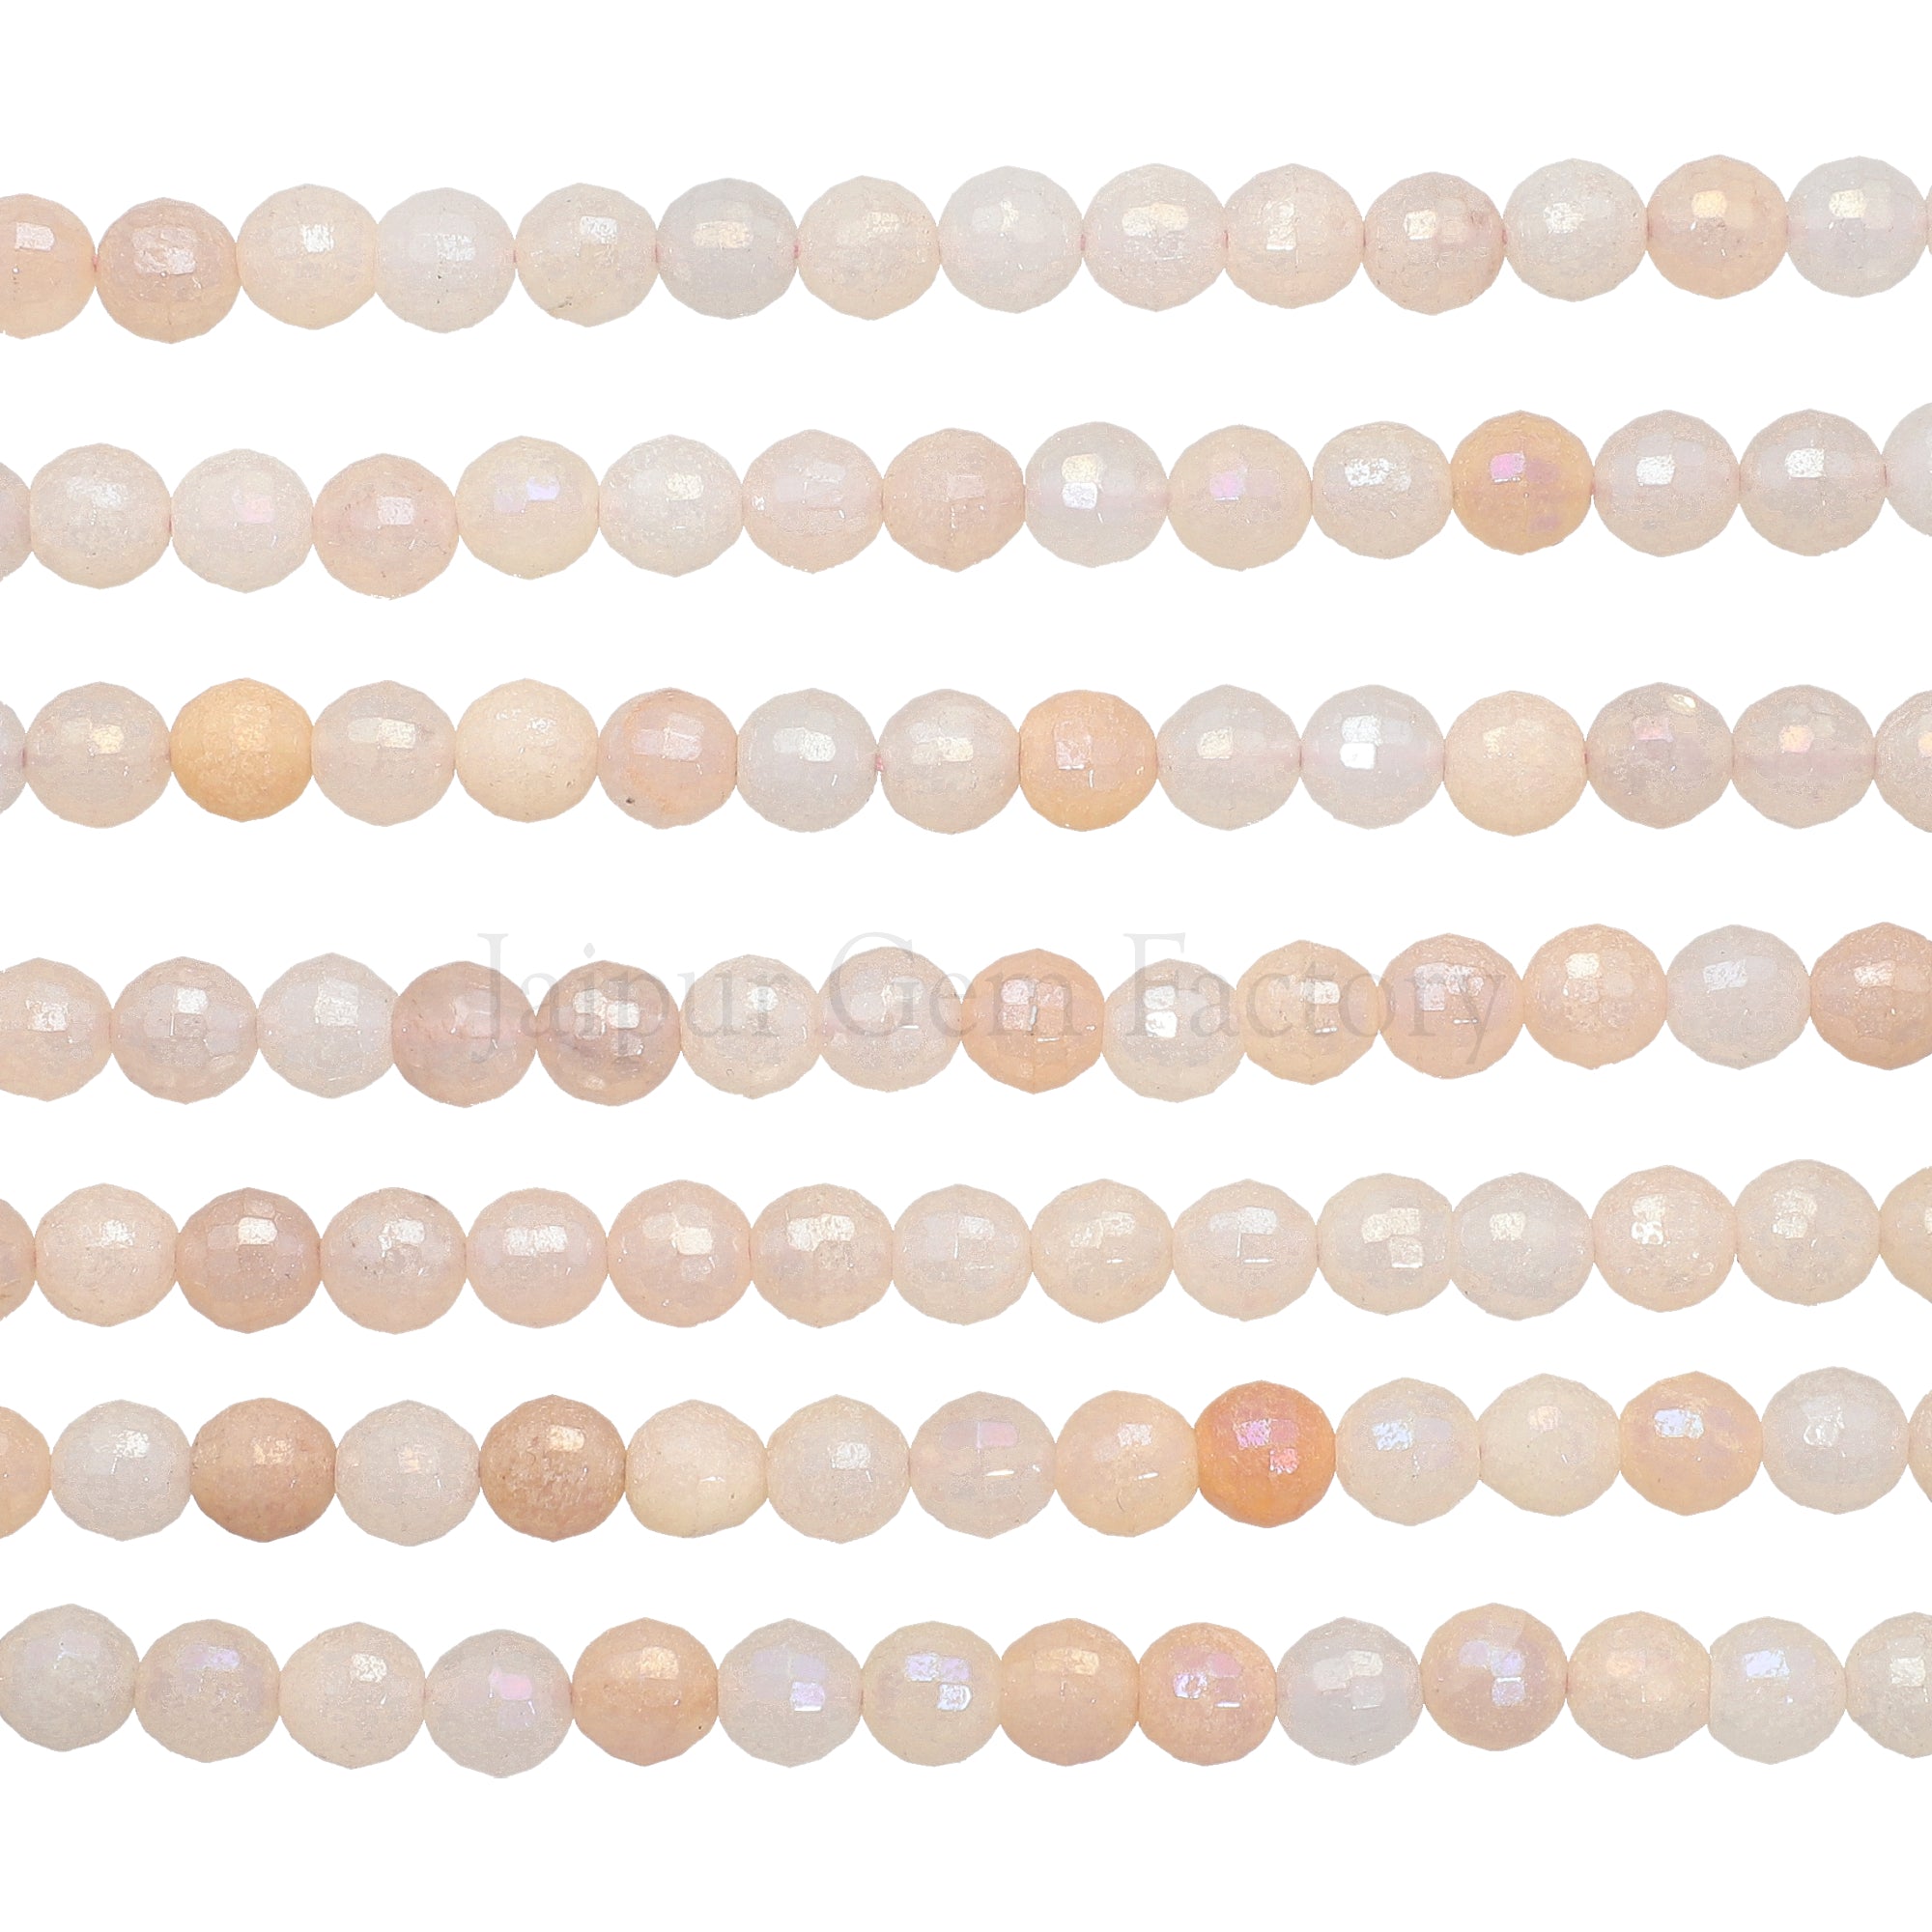 8 MM Pink Aventurine Faceted Round Beads 15 Inches Strand